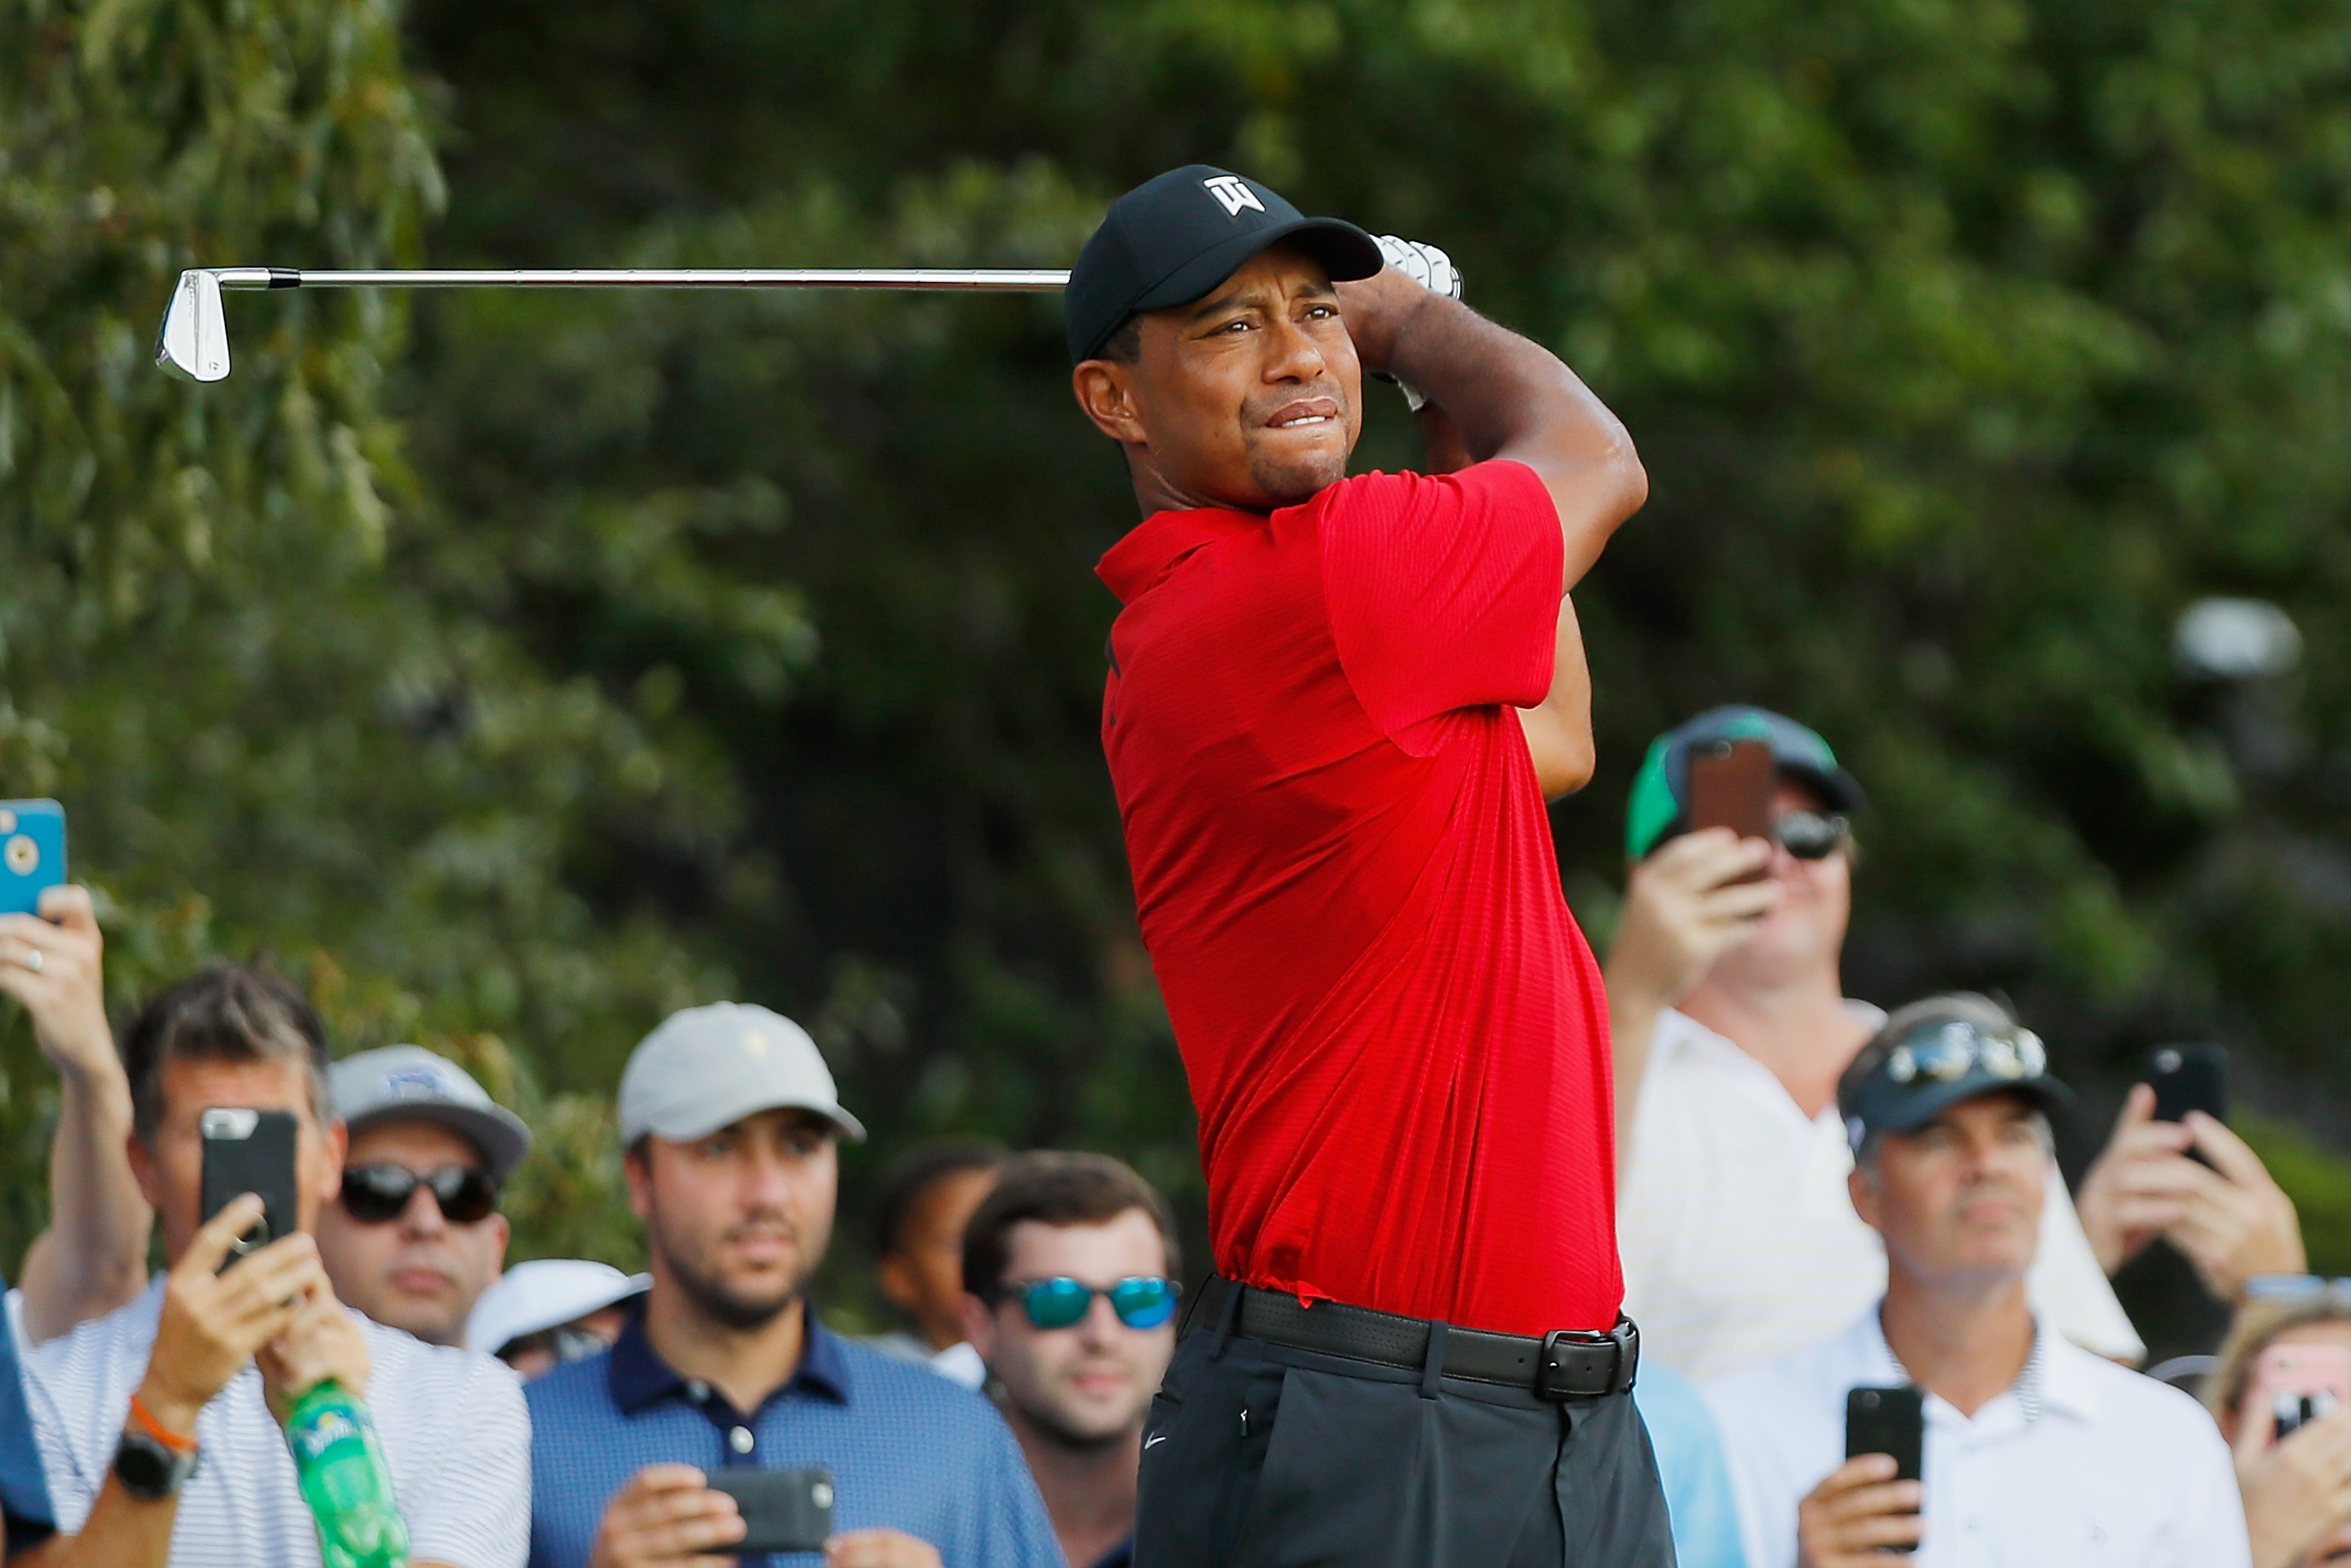 Tiger Woods wins Tour Championship, Justin Rose lifts FedEx Cup 